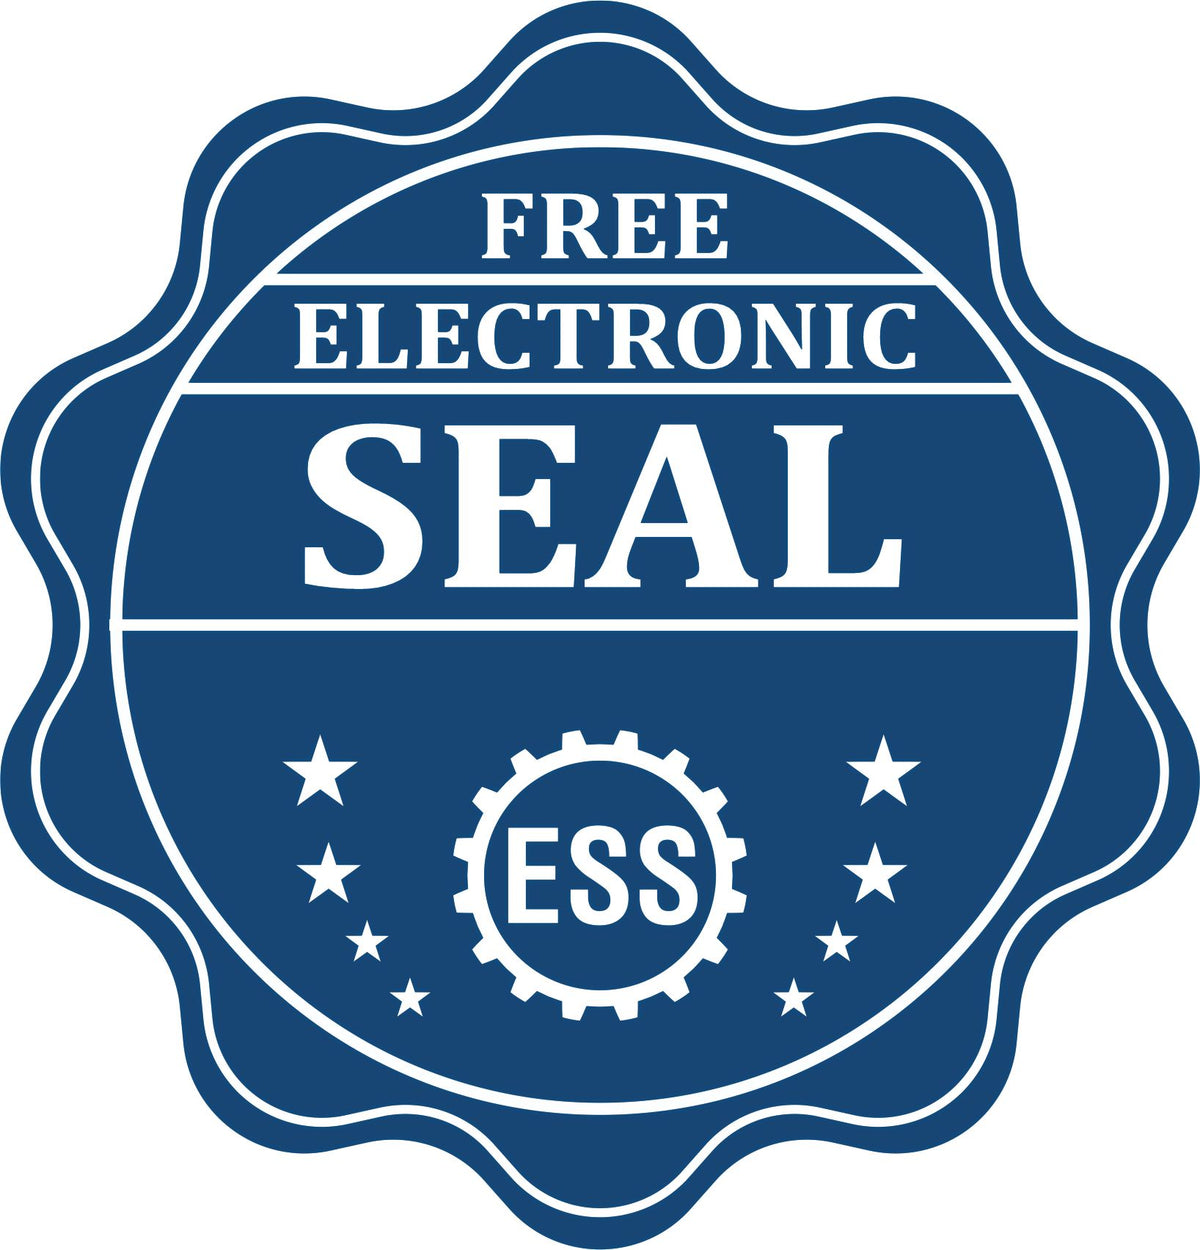 A badge showing a free electronic seal for the Handheld Maine Professional Geologist Embosser with stars and the ESS gear on the emblem.